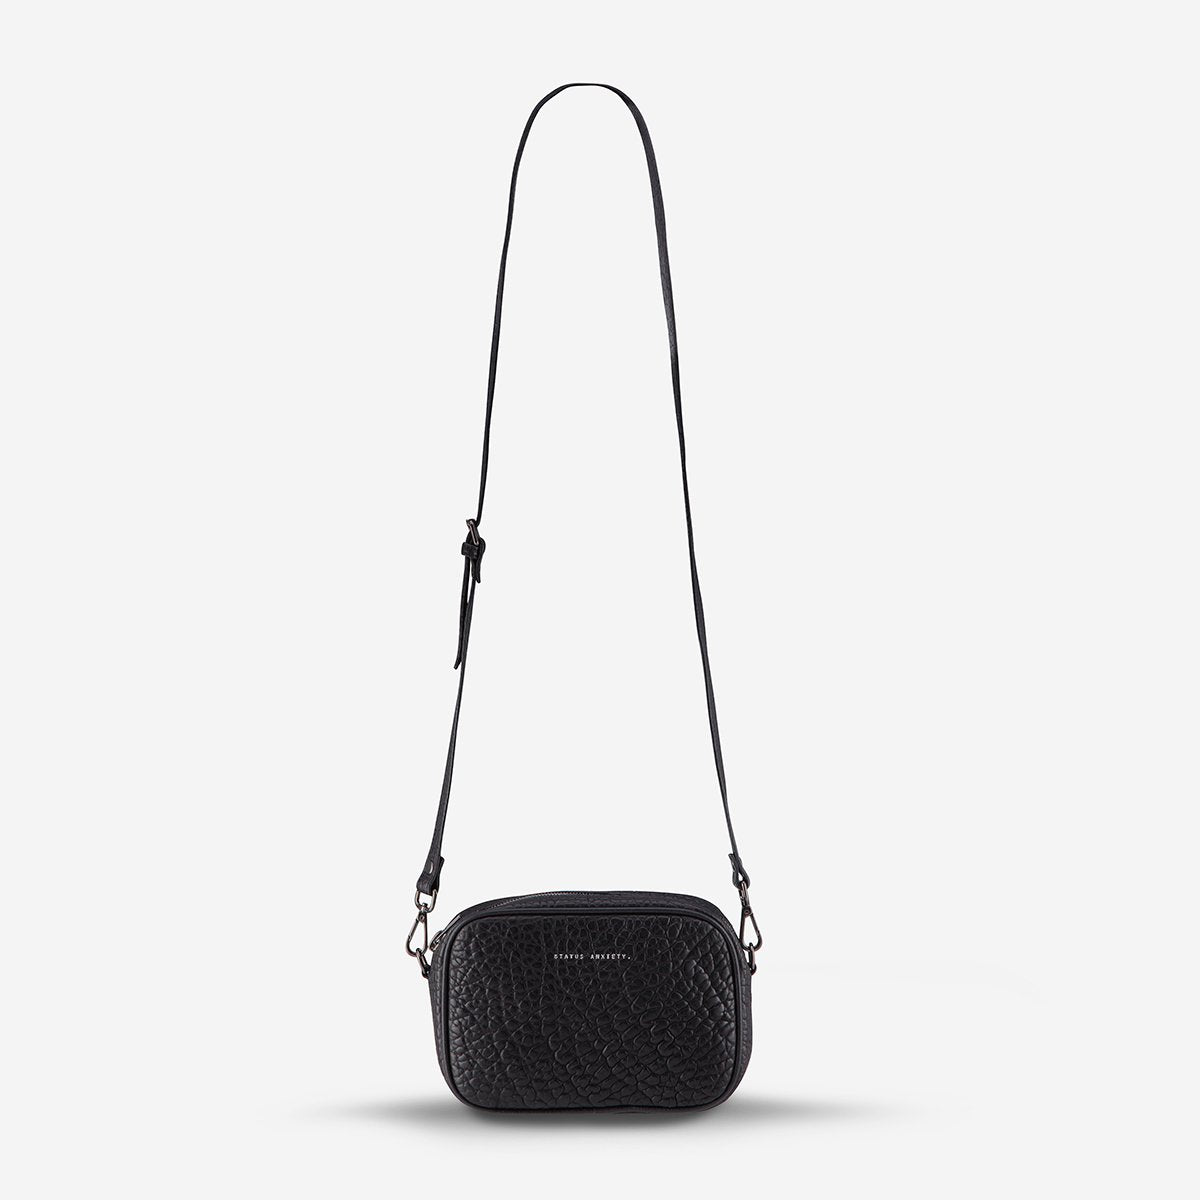 Status Anxiety Bag - Plunder - Black Bubble